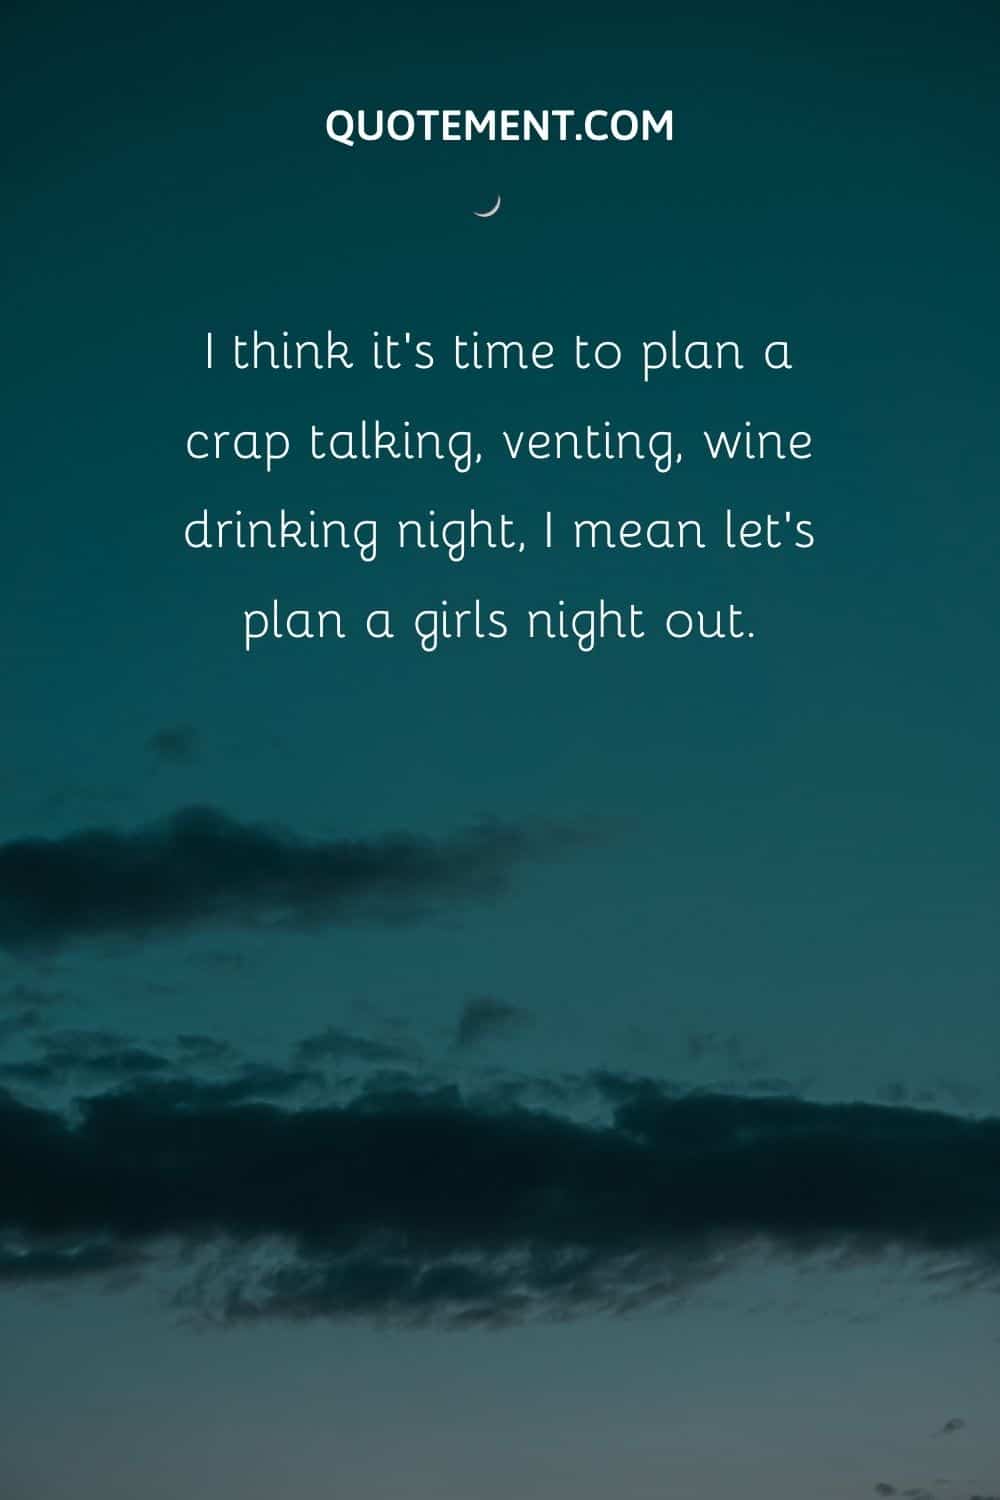 let’s plan a girls night out